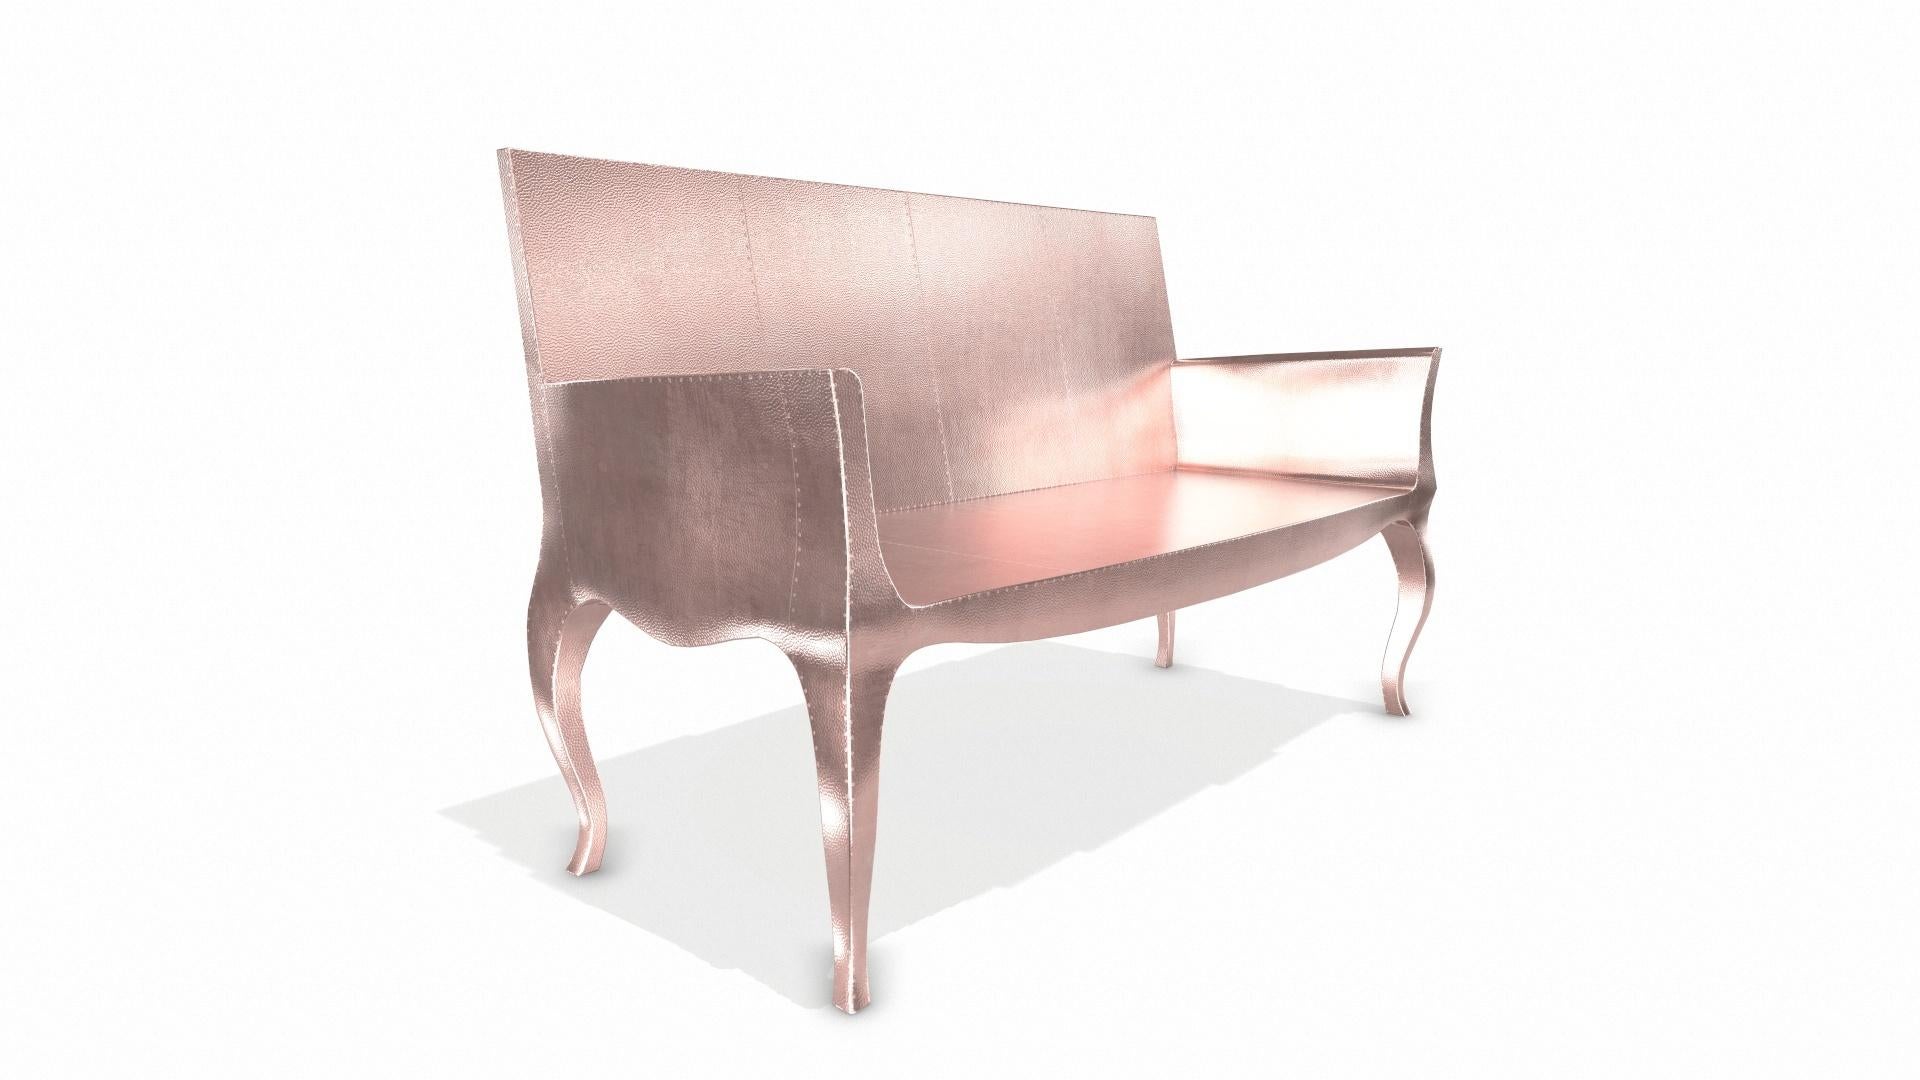 Louise Settee Art Deco Settees in Mid. Hammered Copper by Paul Mathieu In New Condition For Sale In New York, NY